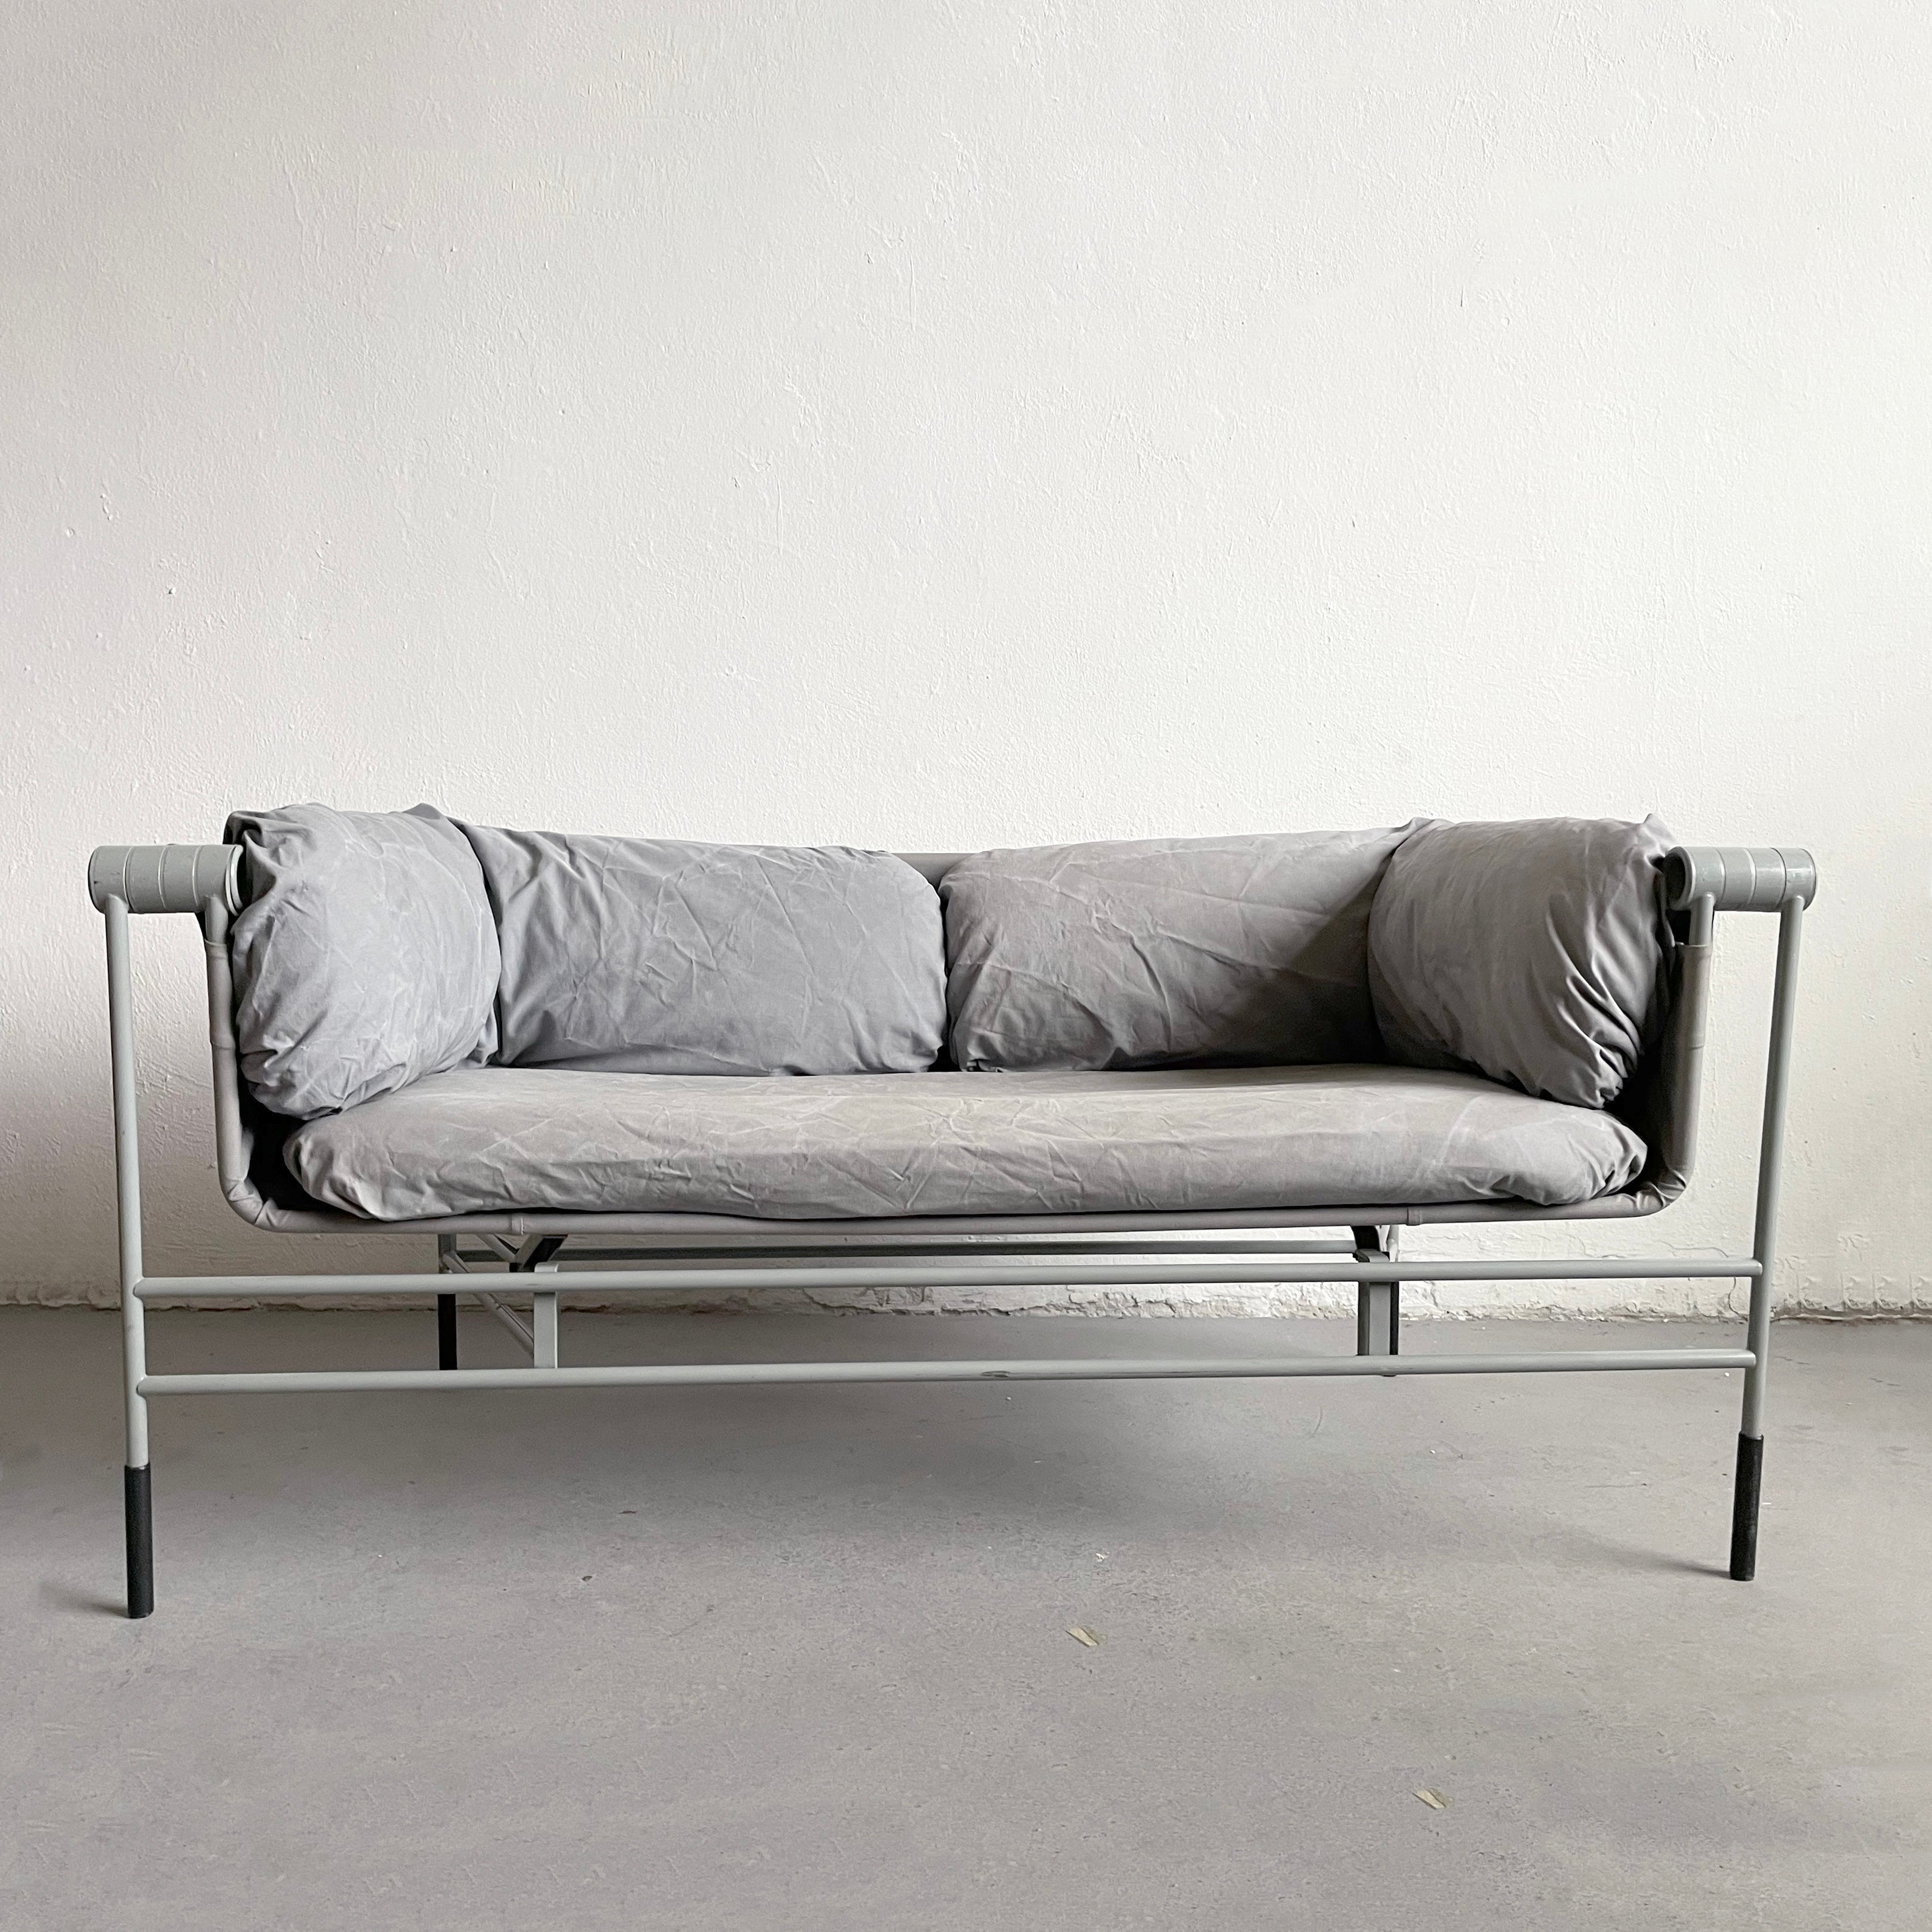 An extremely rare folding sofa with a gray lacquered steel frame, seat in stretched cloth with loose cushions by an unknown designer.

Period: Mid-Century Modern, 1980-1989

Place of origin: Italy

Material: Painted steel, Canvas

Dimensions: HxWxD